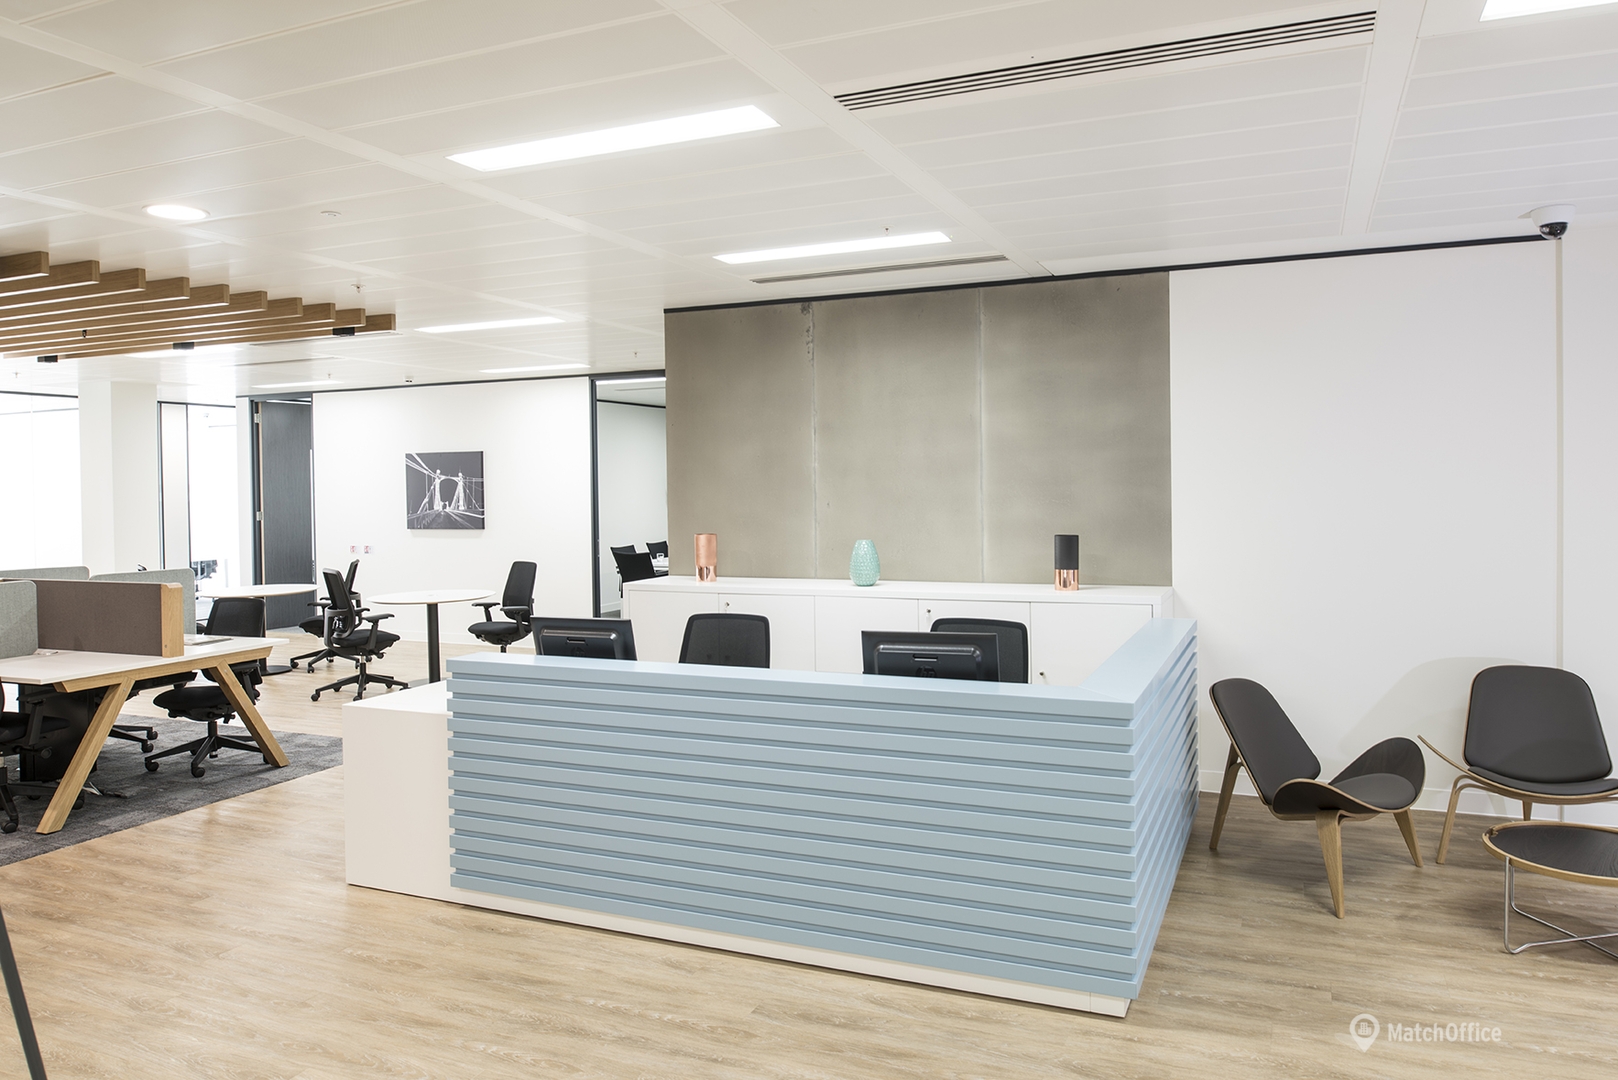 18 Soho Square, W1D 3QL Central London - Virtual office at MatchOffice